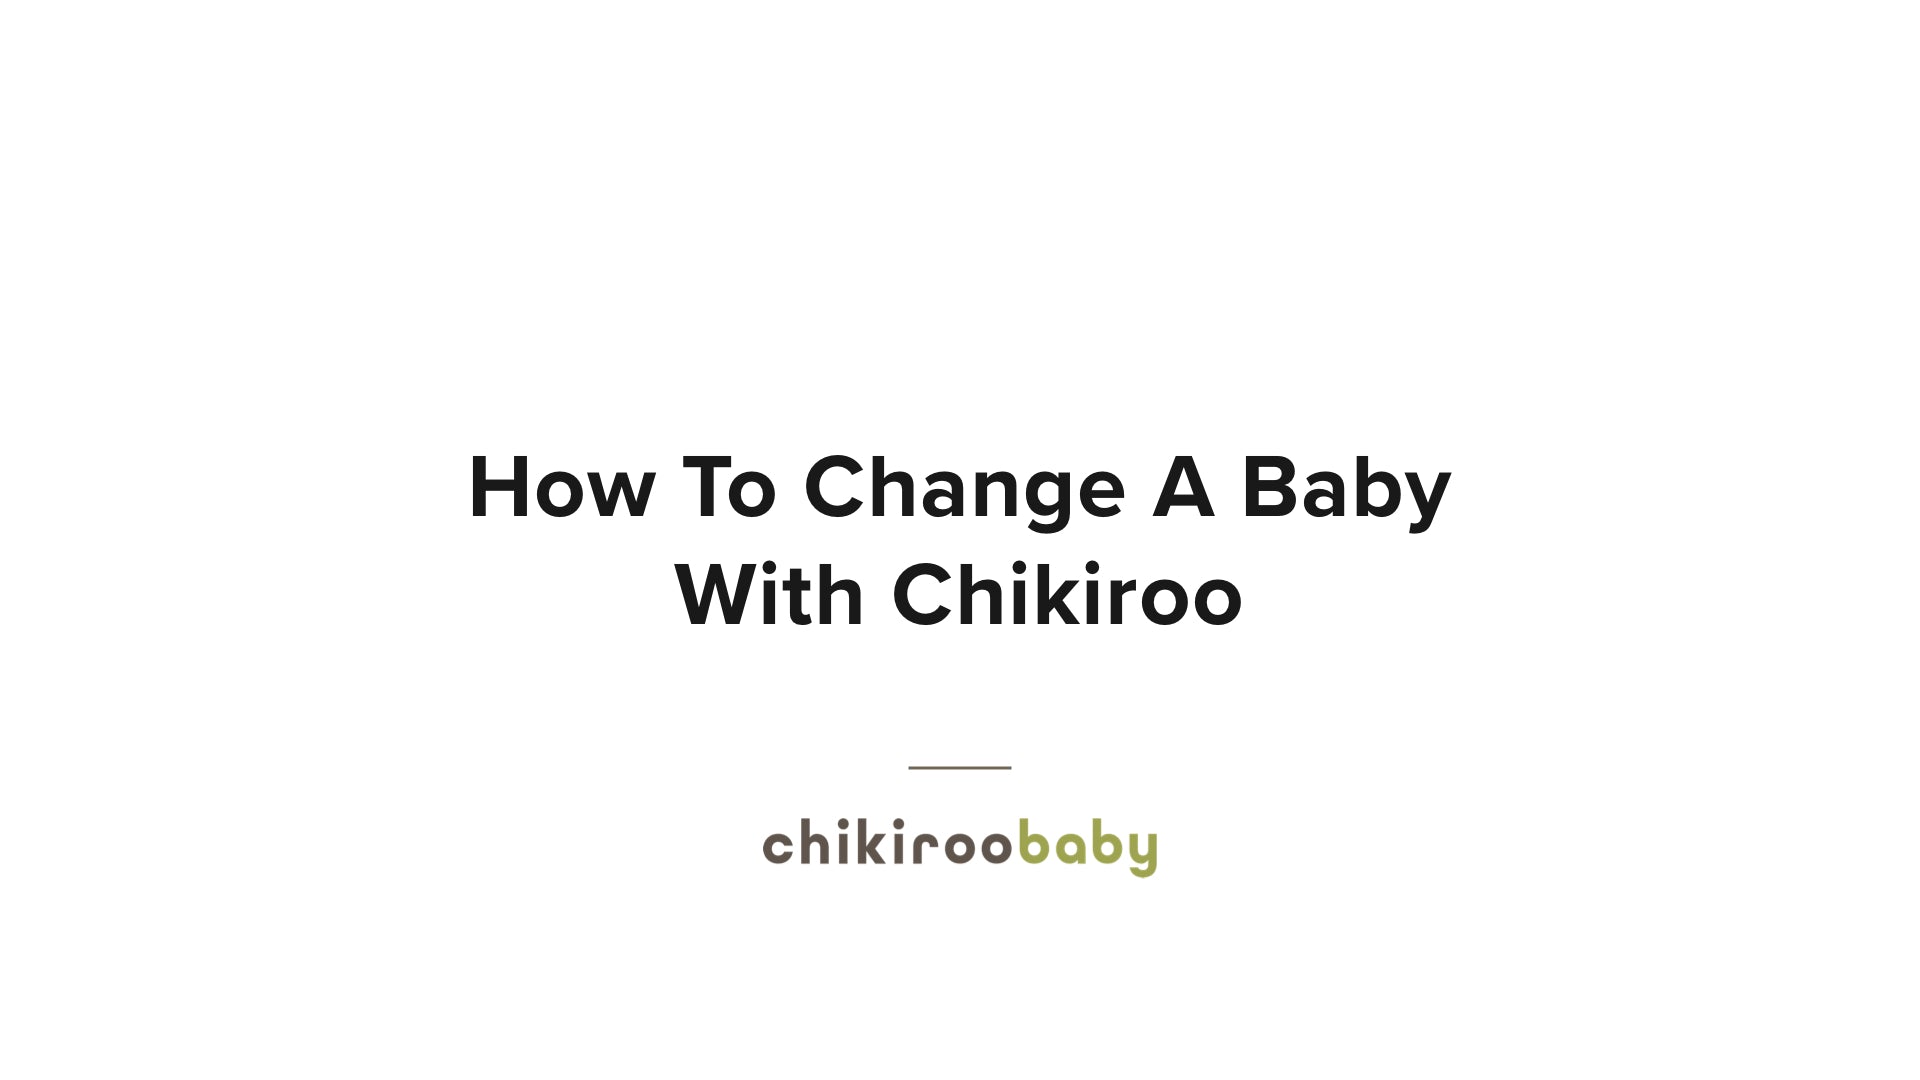 Load video: How to change a baby with Chikiroo